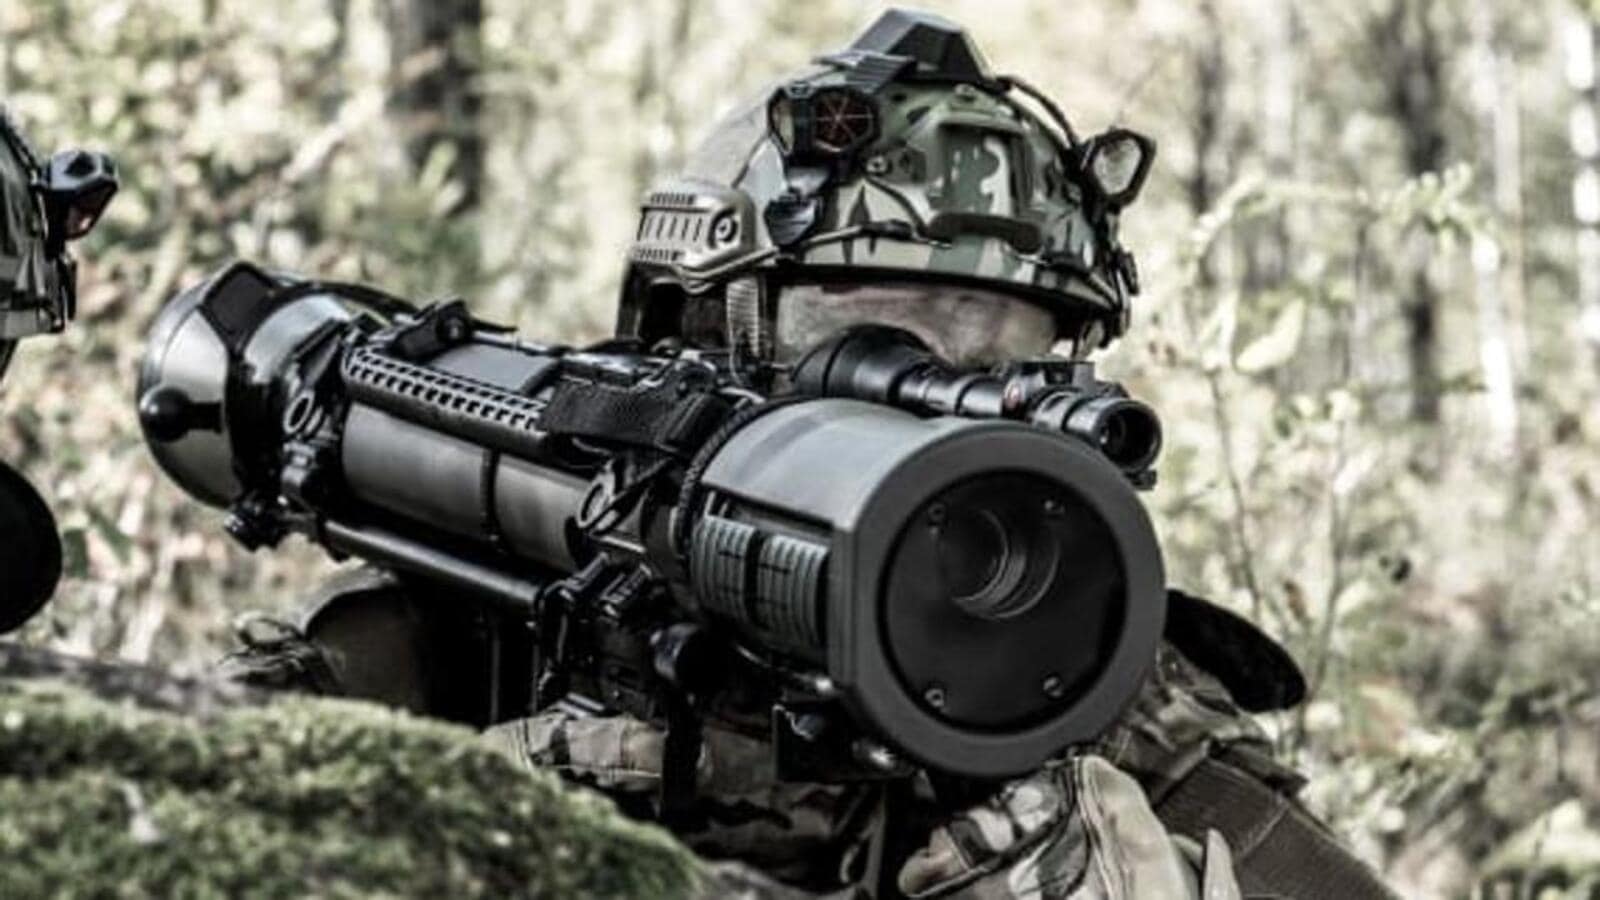 swedish-defence-firm-saab-plans-to-manufacture-carl-gustaf-m4-weapon-in-india